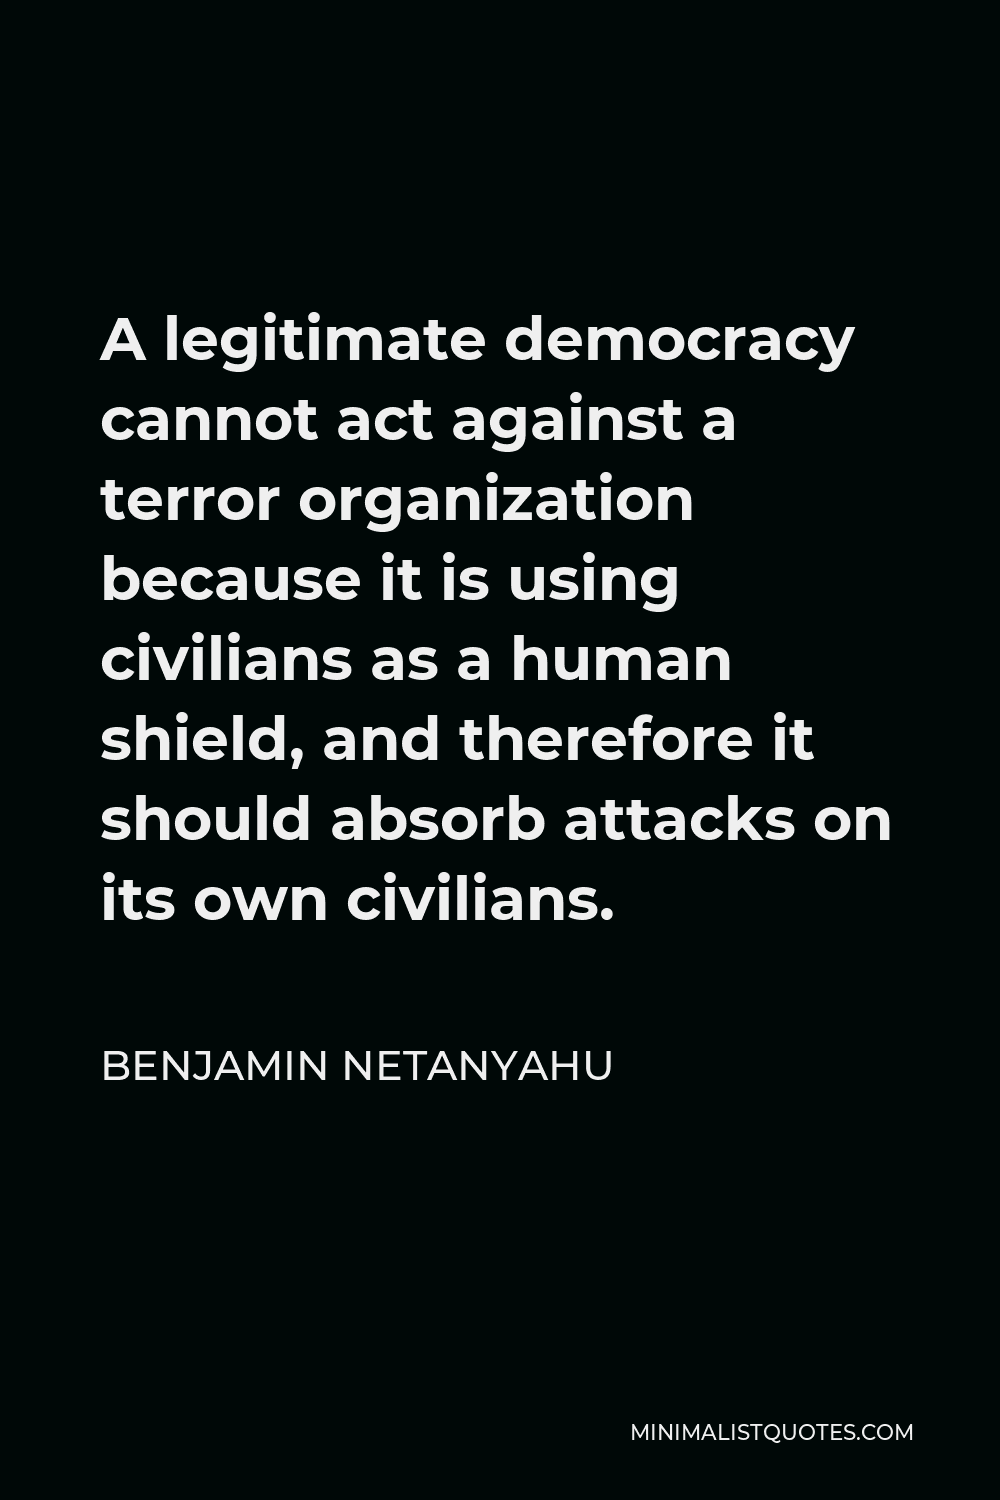 Benjamin Netanyahu Quote - A legitimate democracy cannot act against a terror organization because it is using civilians as a human shield, and therefore it should absorb attacks on its own civilians.